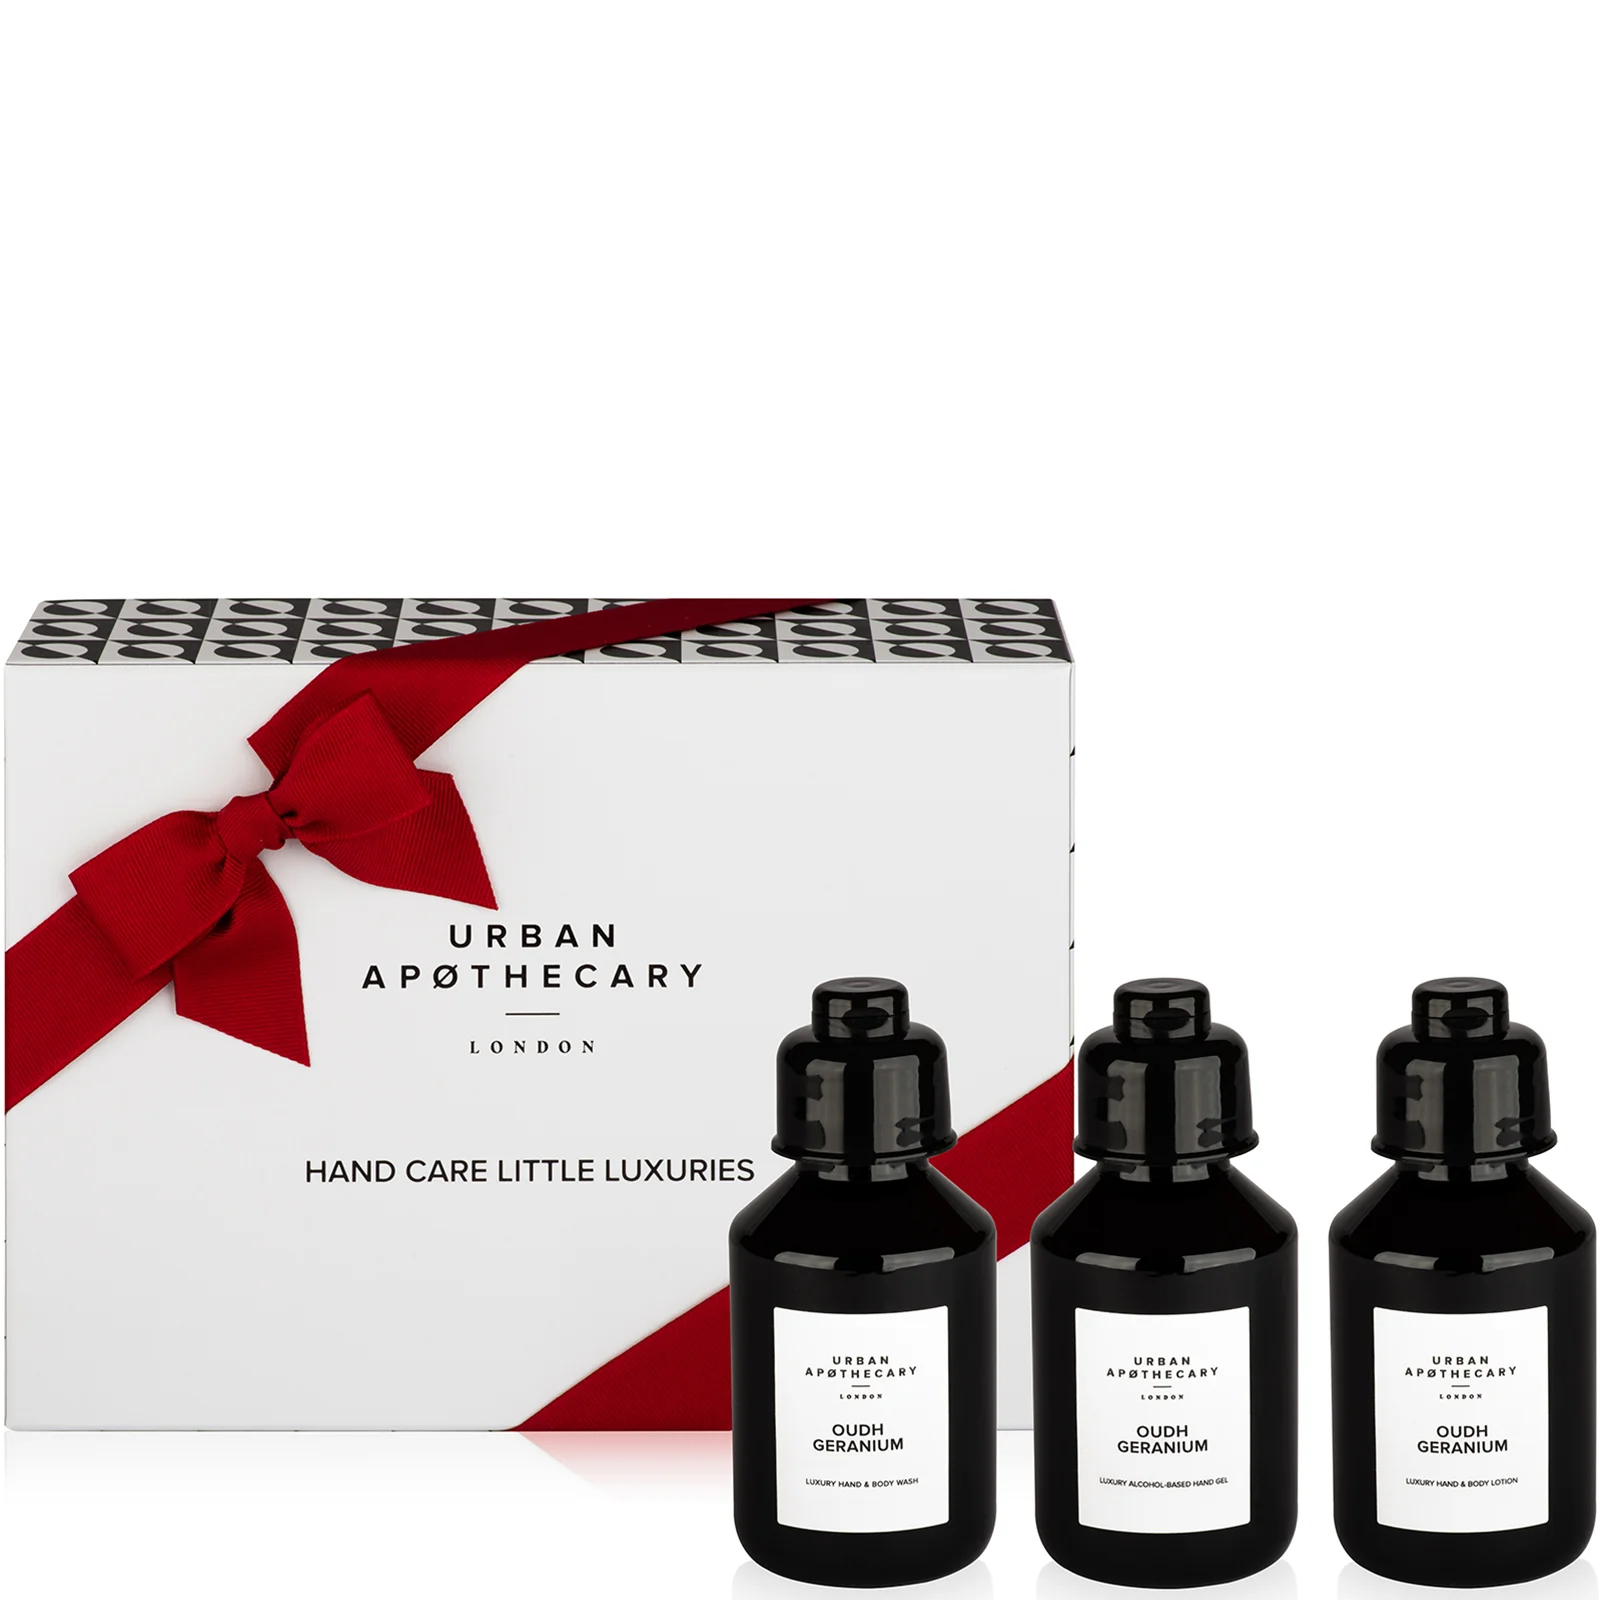 Urban Apothecary Oudh Geranium Hand Care Little Luxuries Gift Set (3 pieces) Image 1